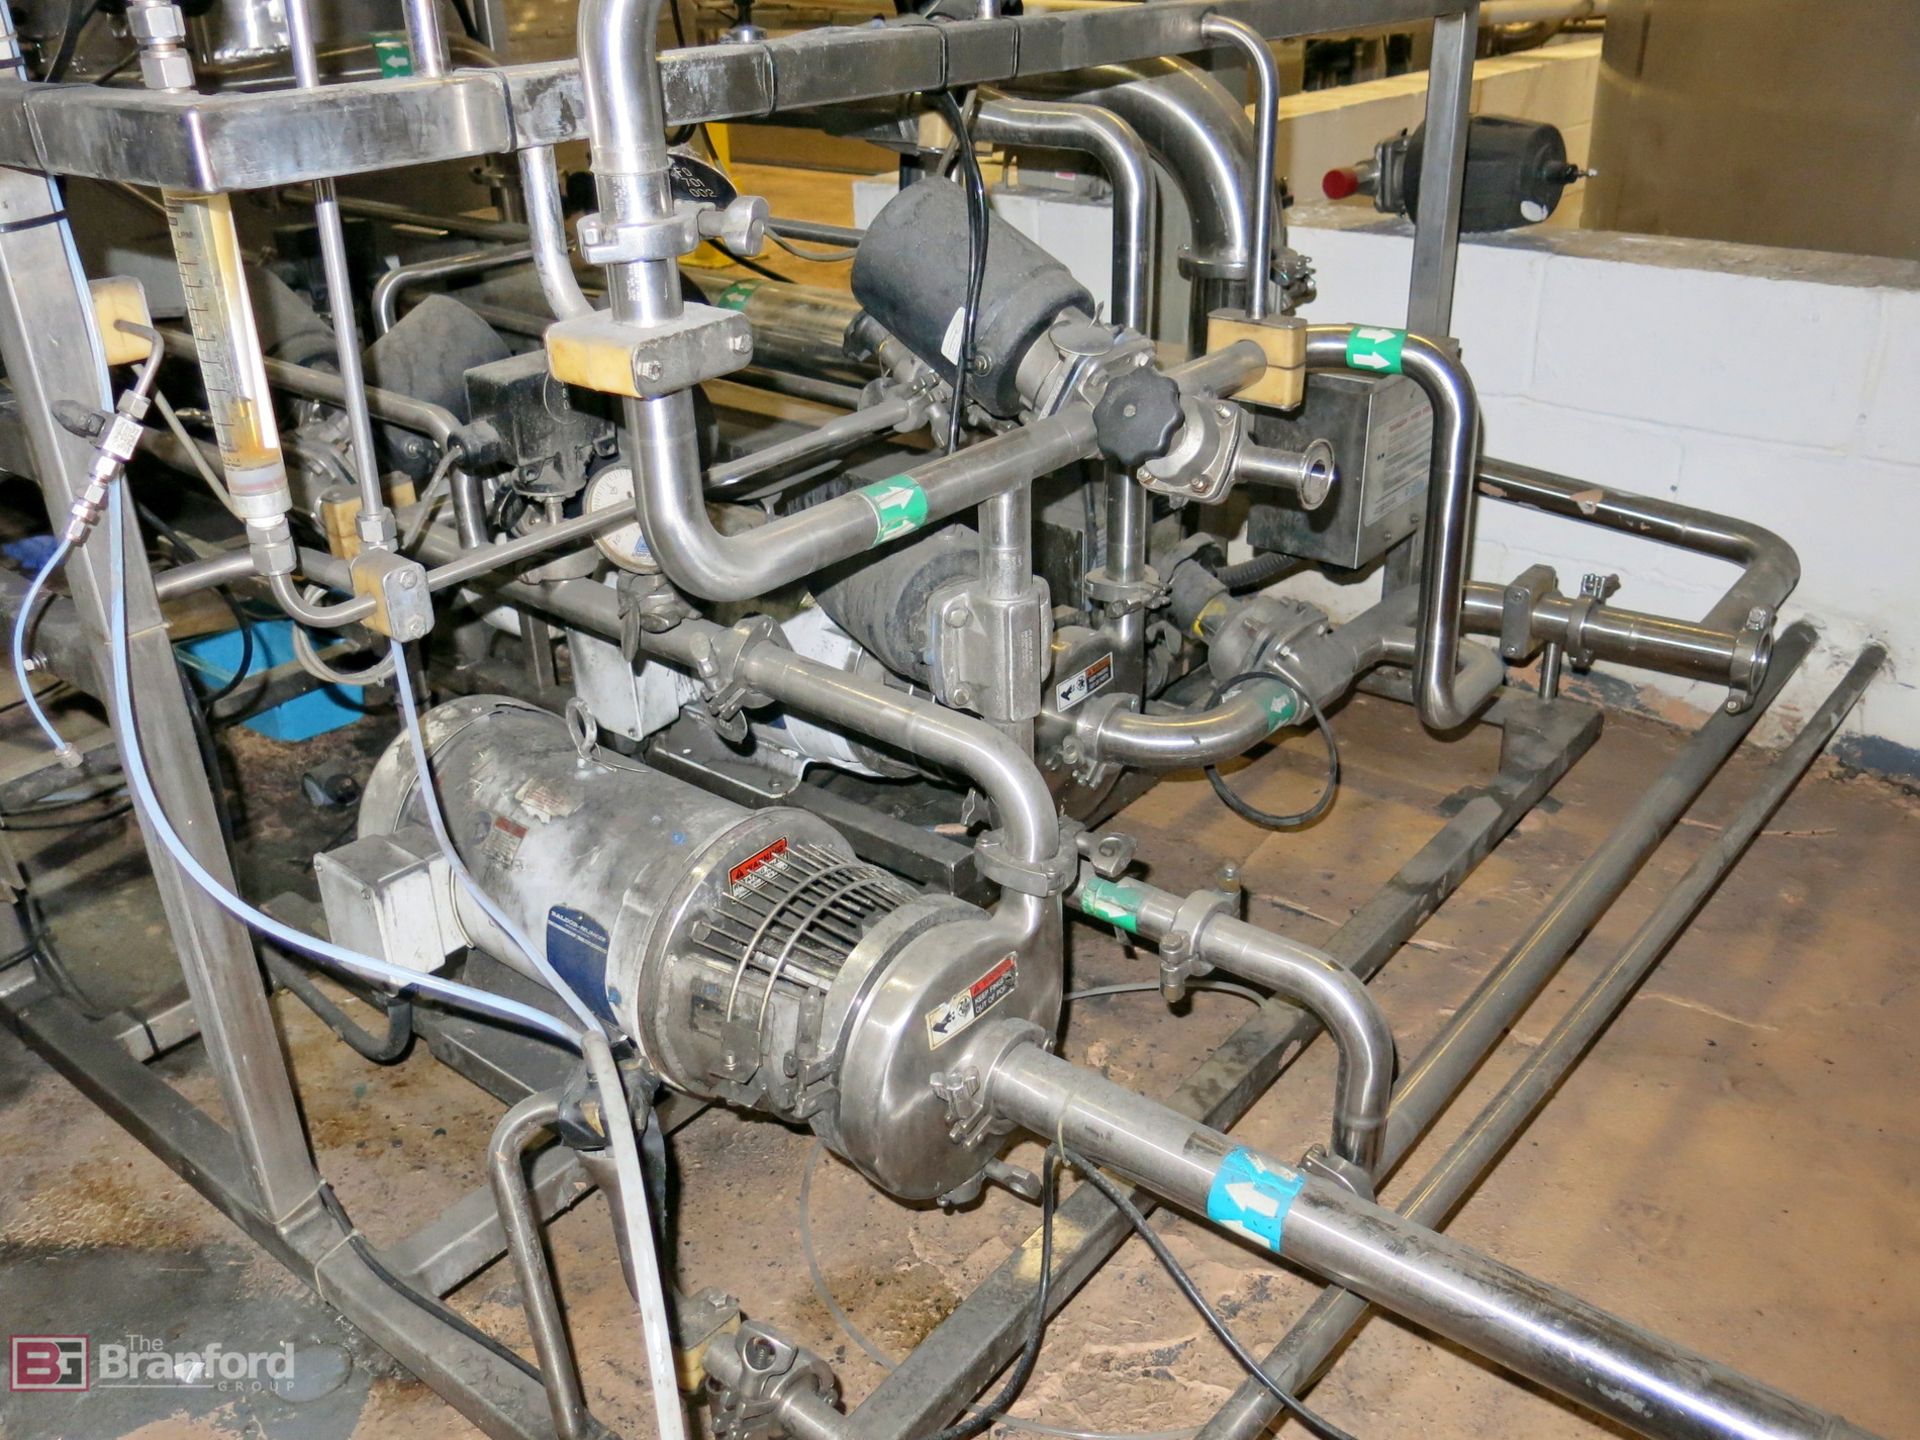 Ultraviolet ozone generating water purification flow station - Image 7 of 7